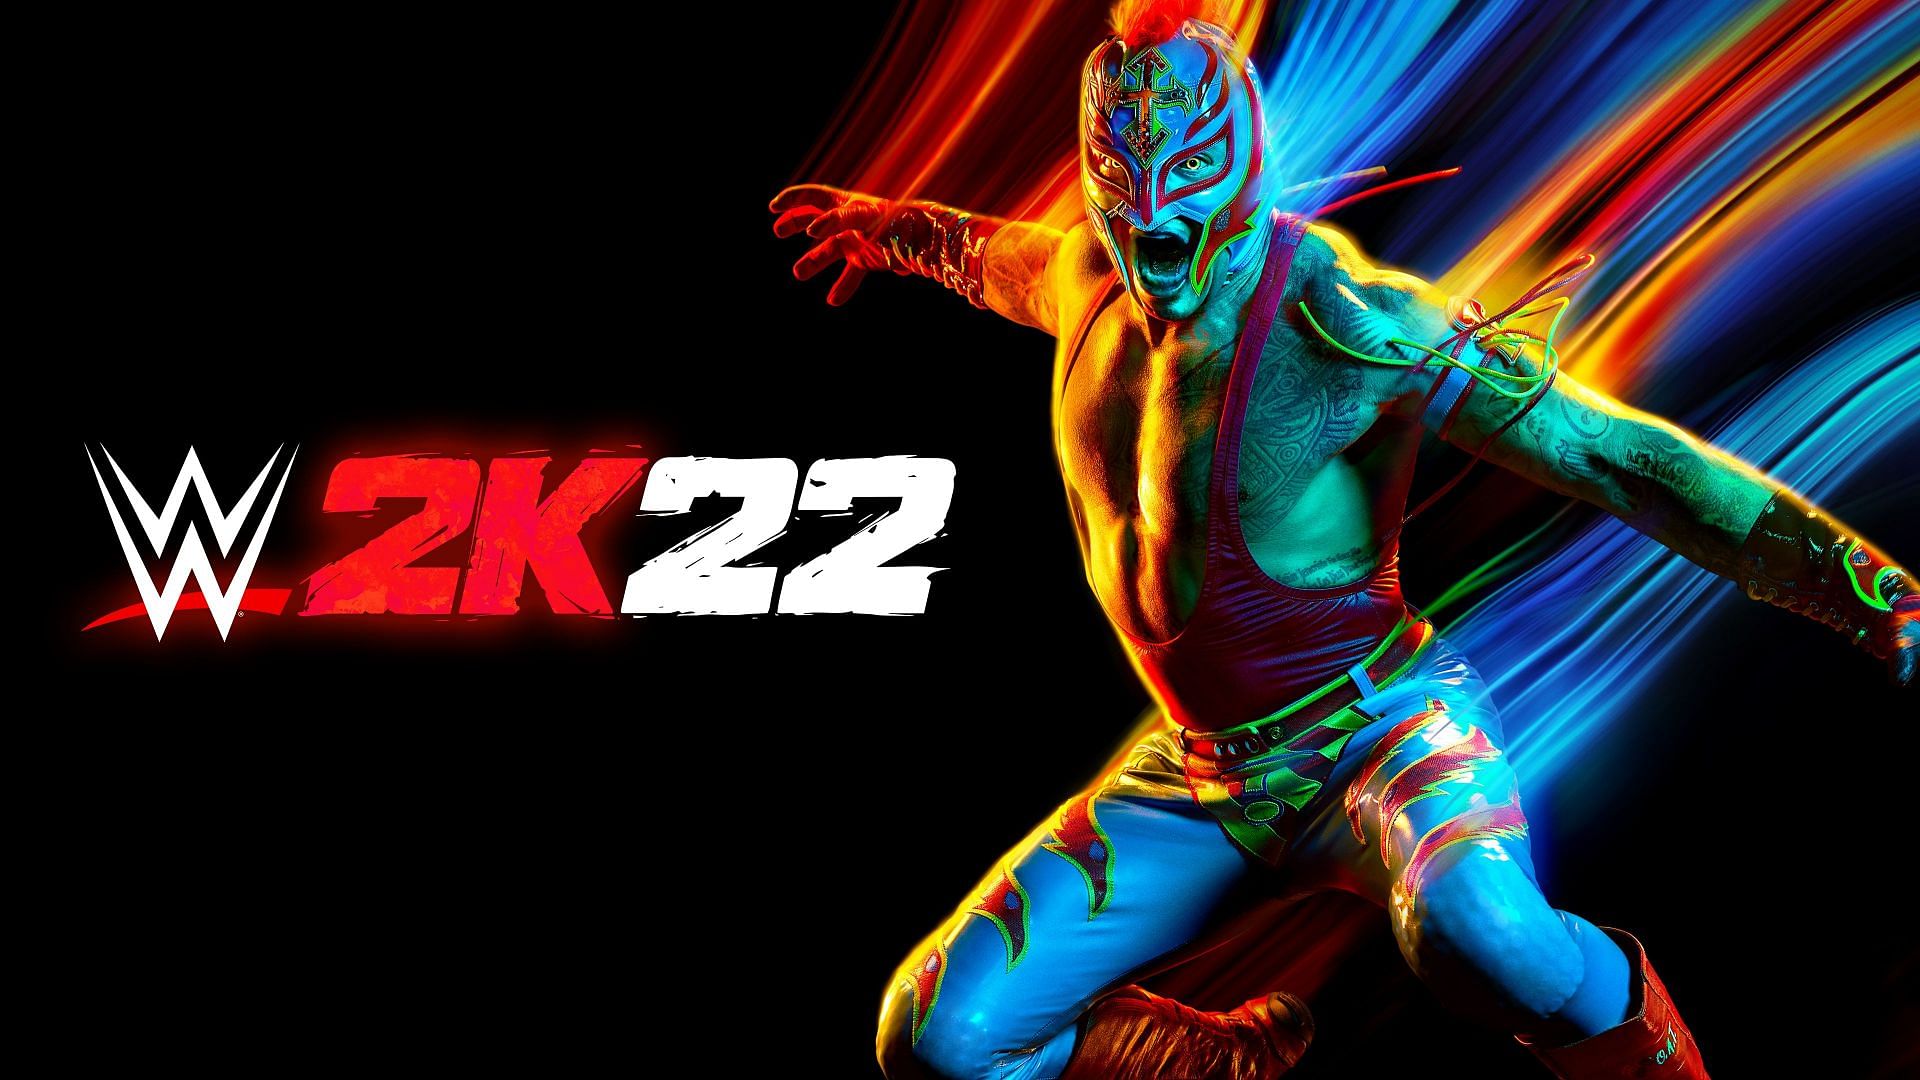 Rey Mysterio will be the cover star for WWE 2K22